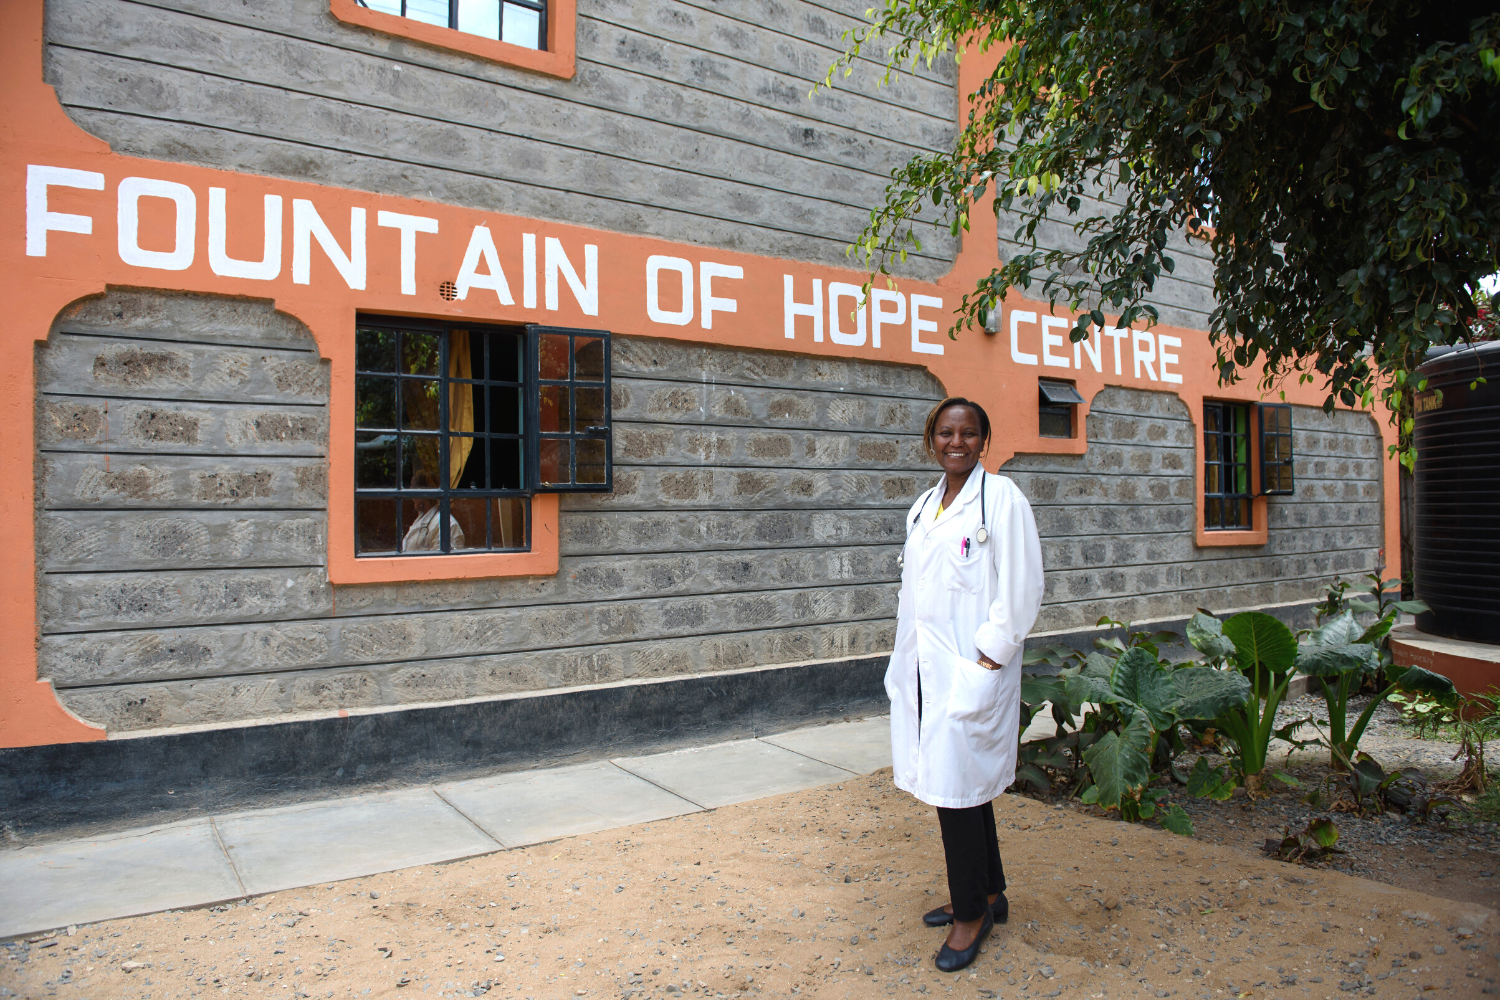 Dr. Catherine Amulundu poses with the Fountain of Hope Centre sign